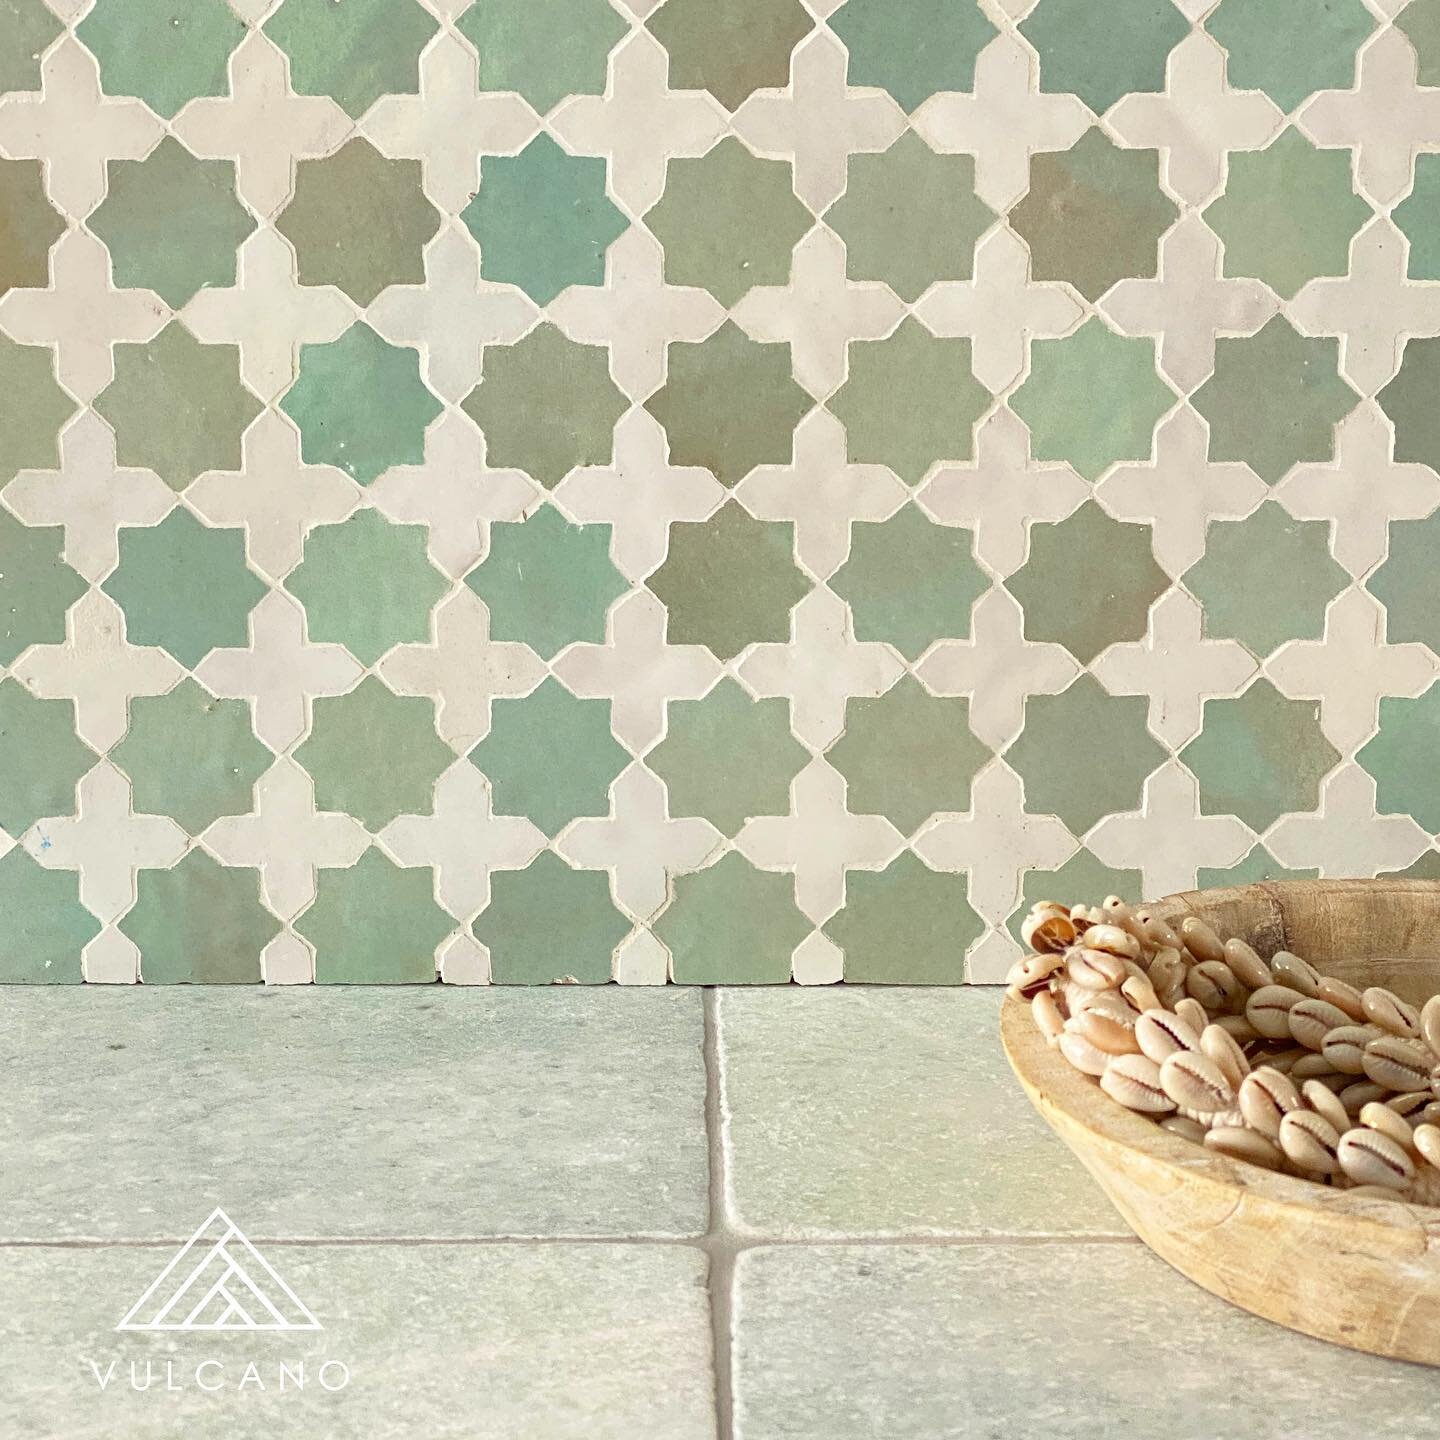 The subtlety of colour in our handmade Moroccan series is beautifully shown in Moroccan panels. Like a landscape behind a delicate lattice, organic colours change through earthy tones to various greens. Room complete with tumbled Verdi Cristallo marb